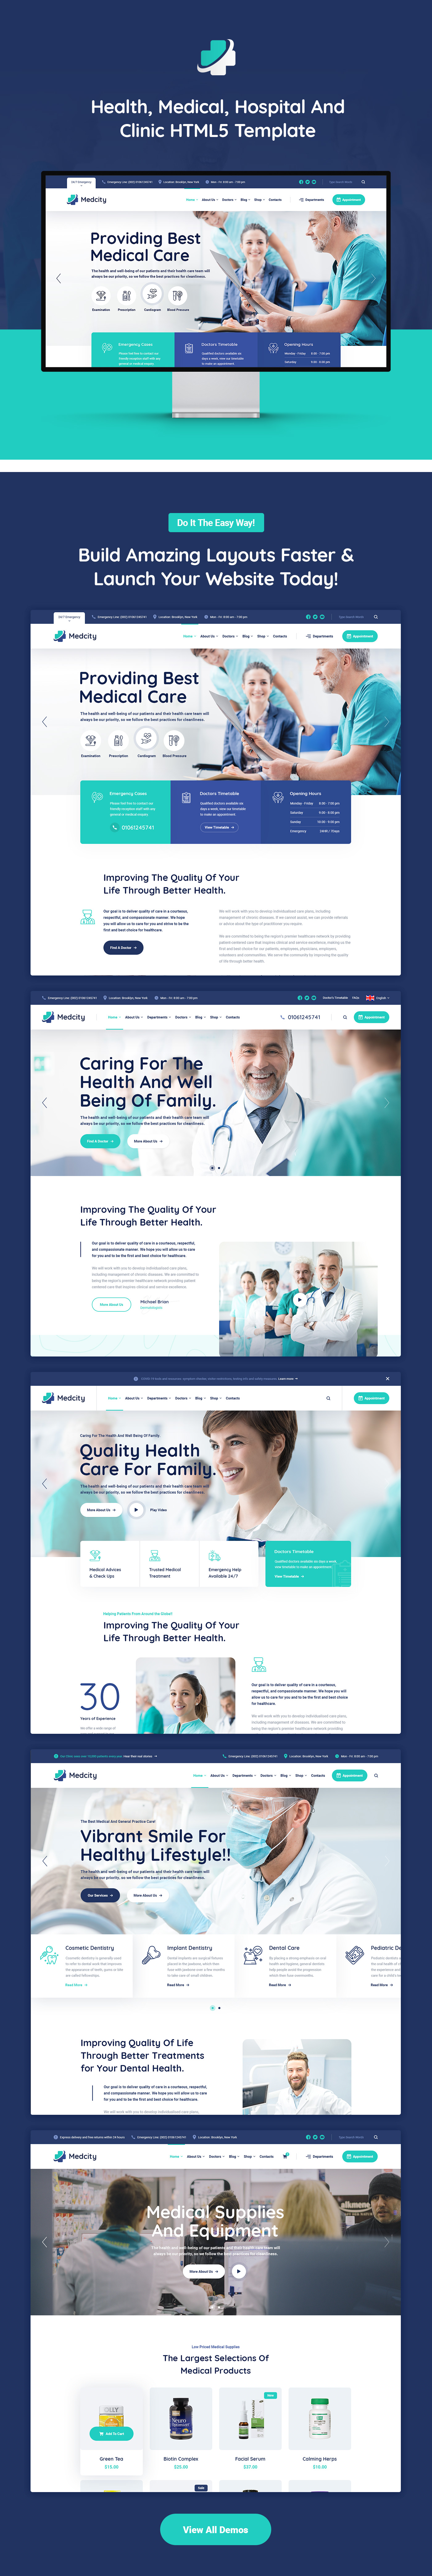 Medcity - Health & Medical HTML5 Template - 5